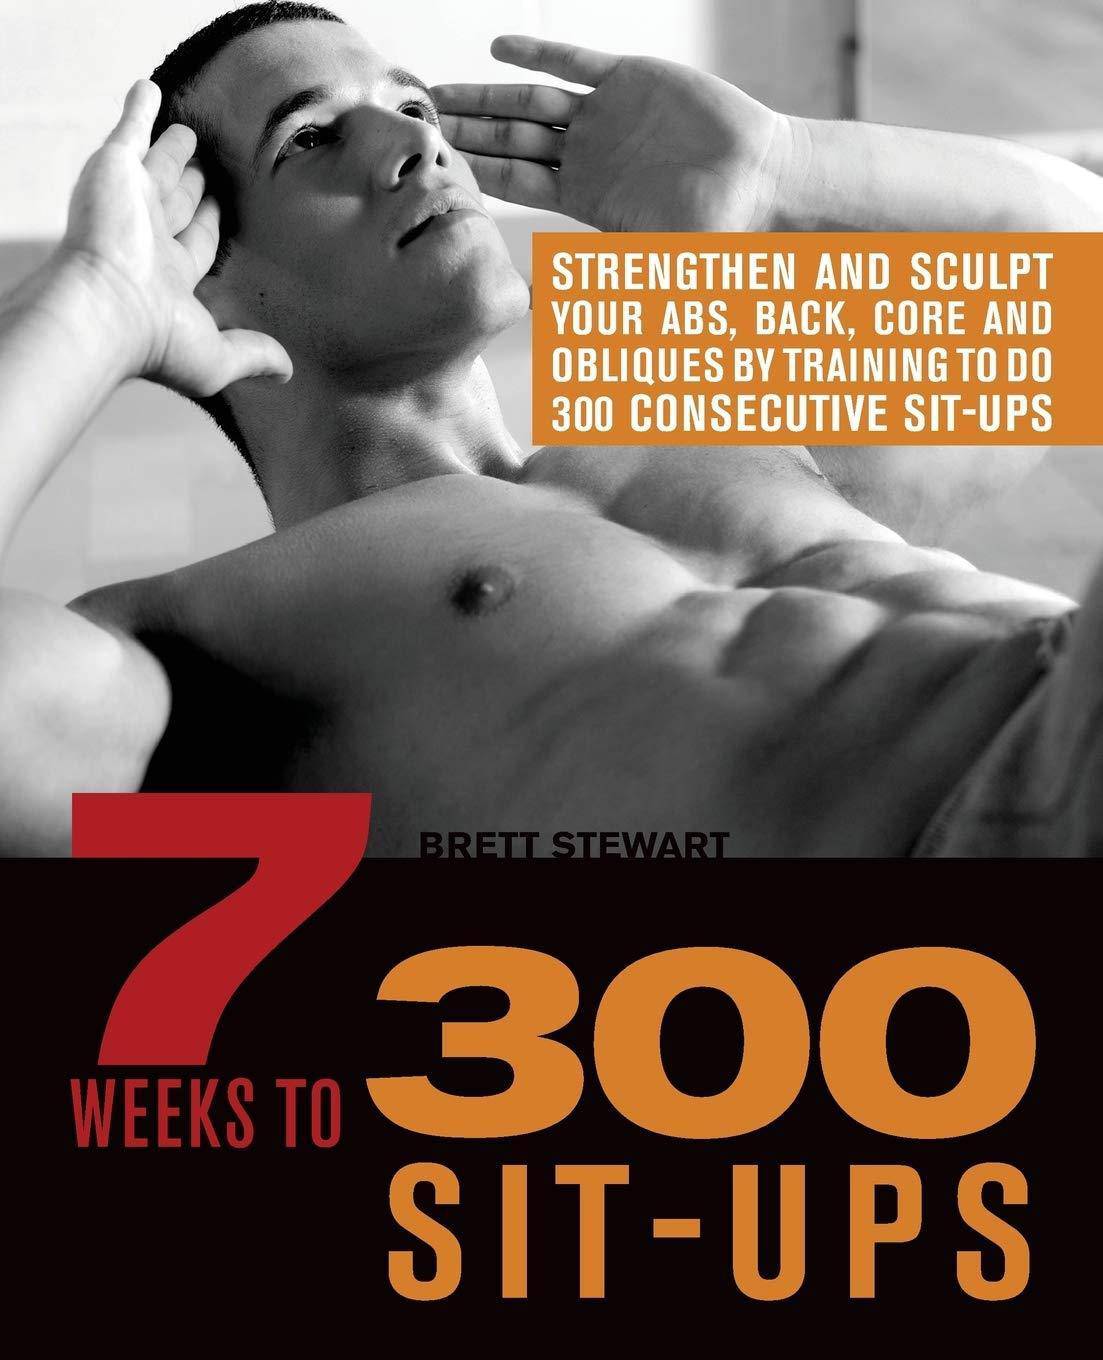 7 Weeks to 300 Sit-Ups: Strengthen and Sculpt Your Abs, Back, Co - SureShot Books Publishing LLC